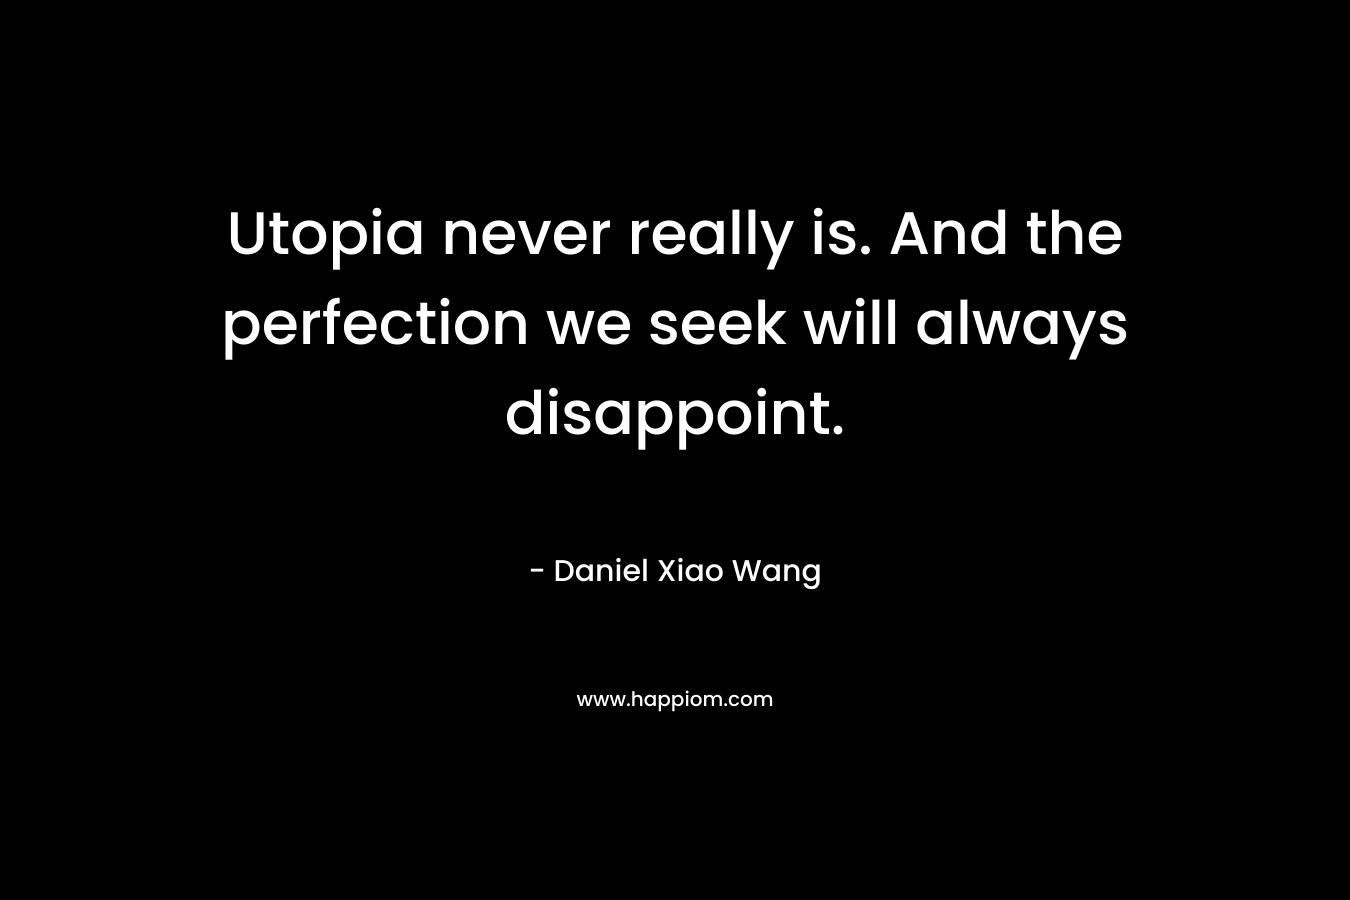 Utopia never really is. And the perfection we seek will always disappoint. – Daniel Xiao Wang